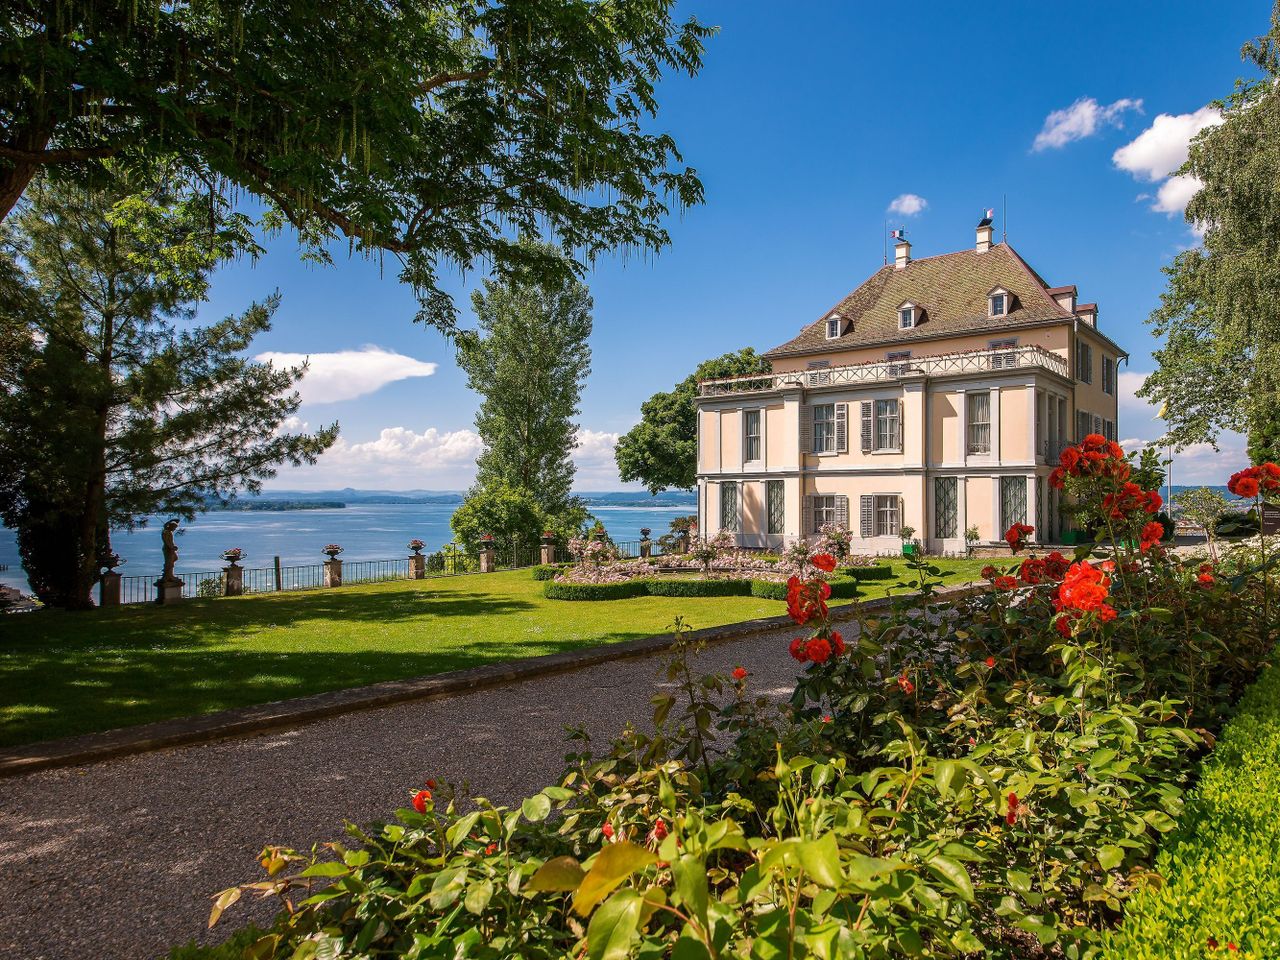 5 Tage Adventszauber am Bodensee